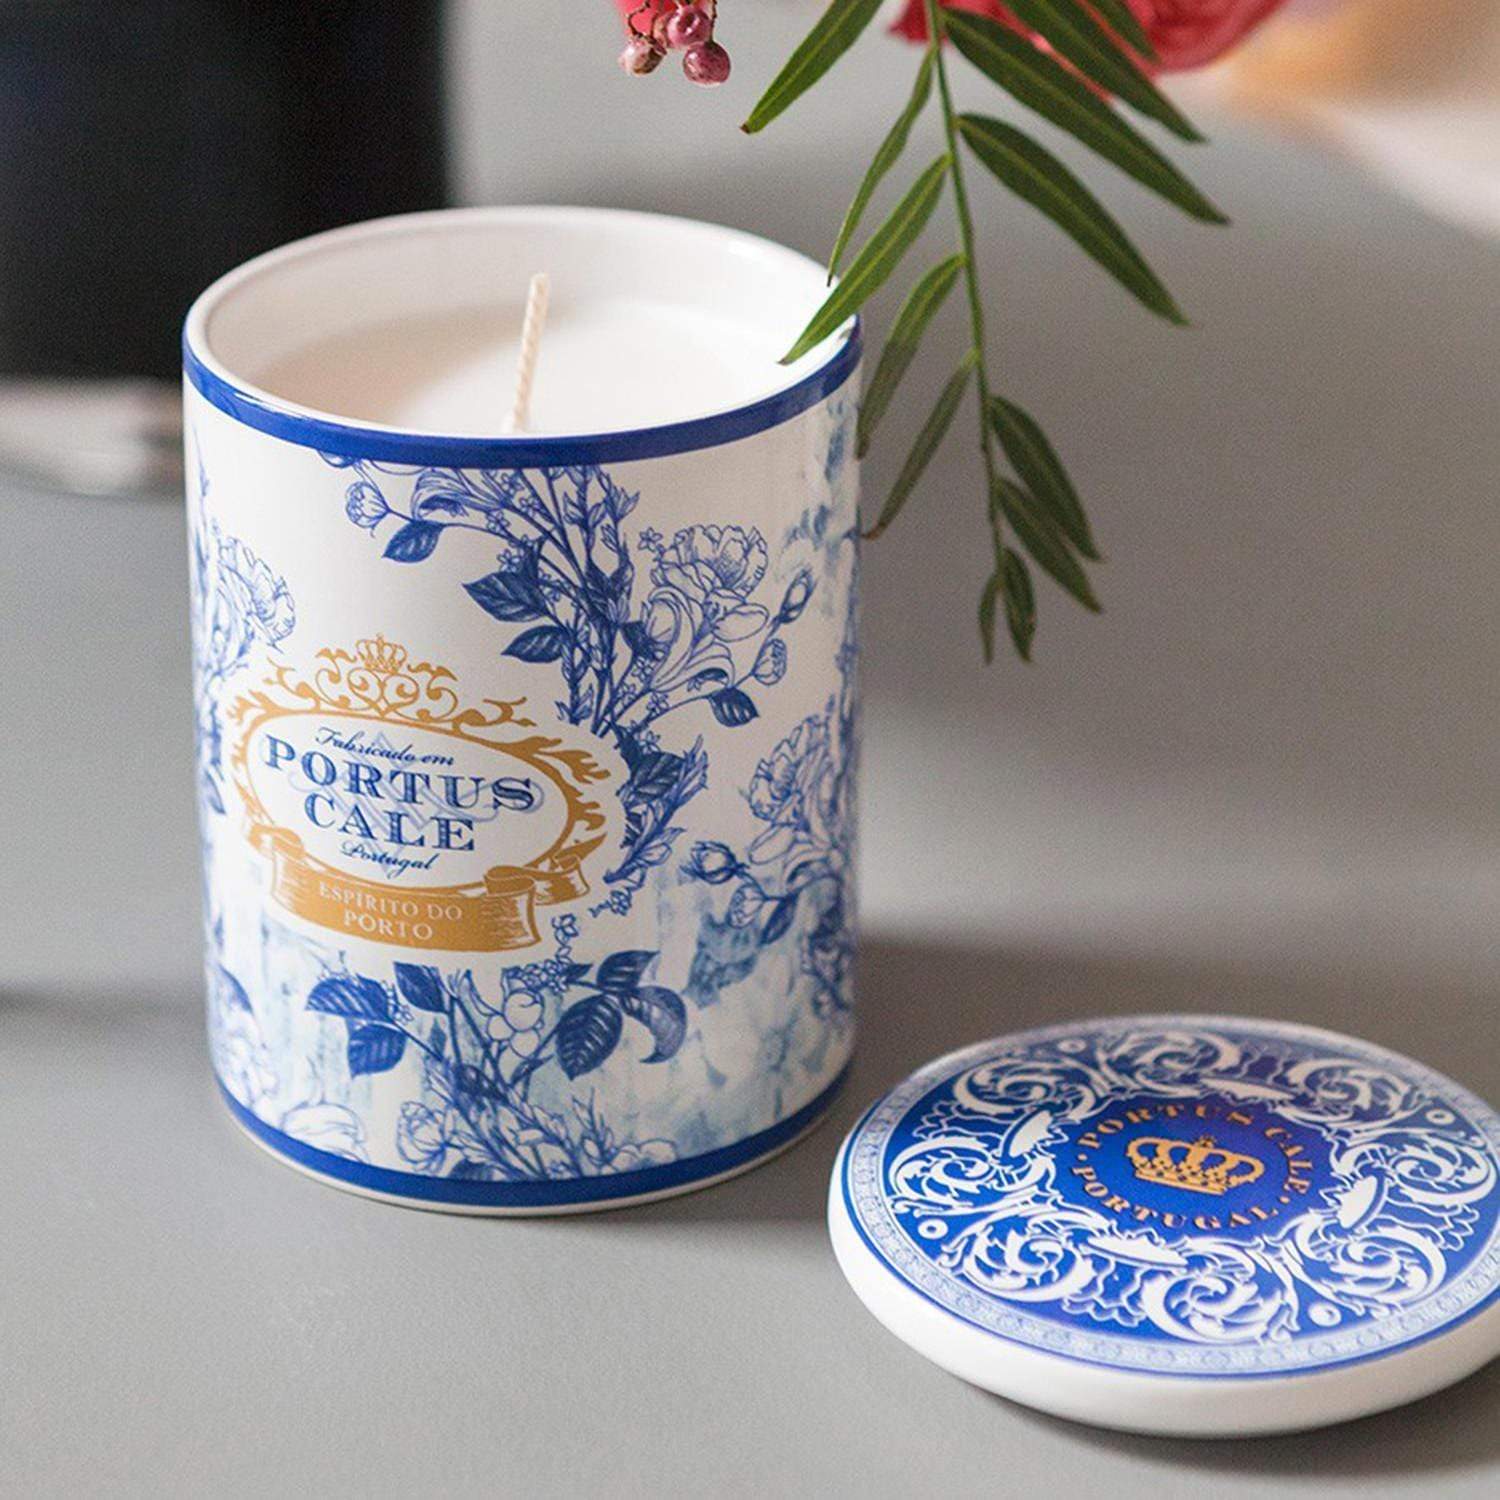 Castelbel Portus Cale Gold and Blue Fragrance Candle - C2-2301 - Jashanmal Home